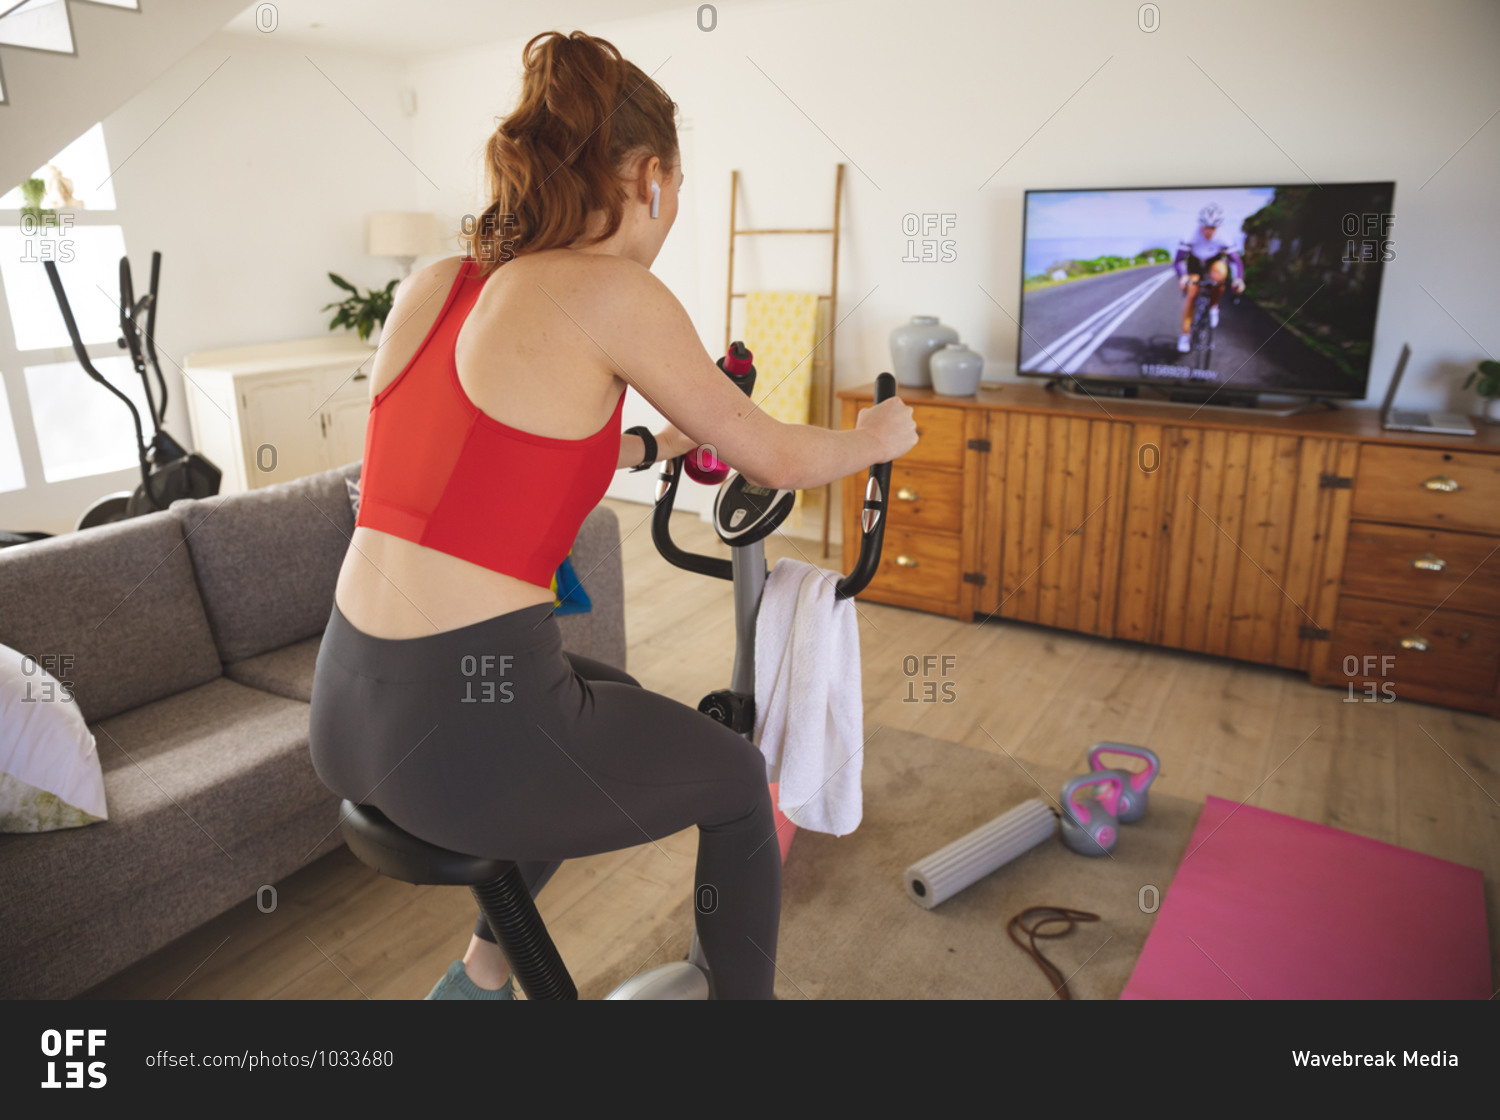 Caucasian woman spending time at home, in living room, exercising on stationary bike, watching tv. Social distancing during Covid 19 Coronavirus quarantine lockdown.